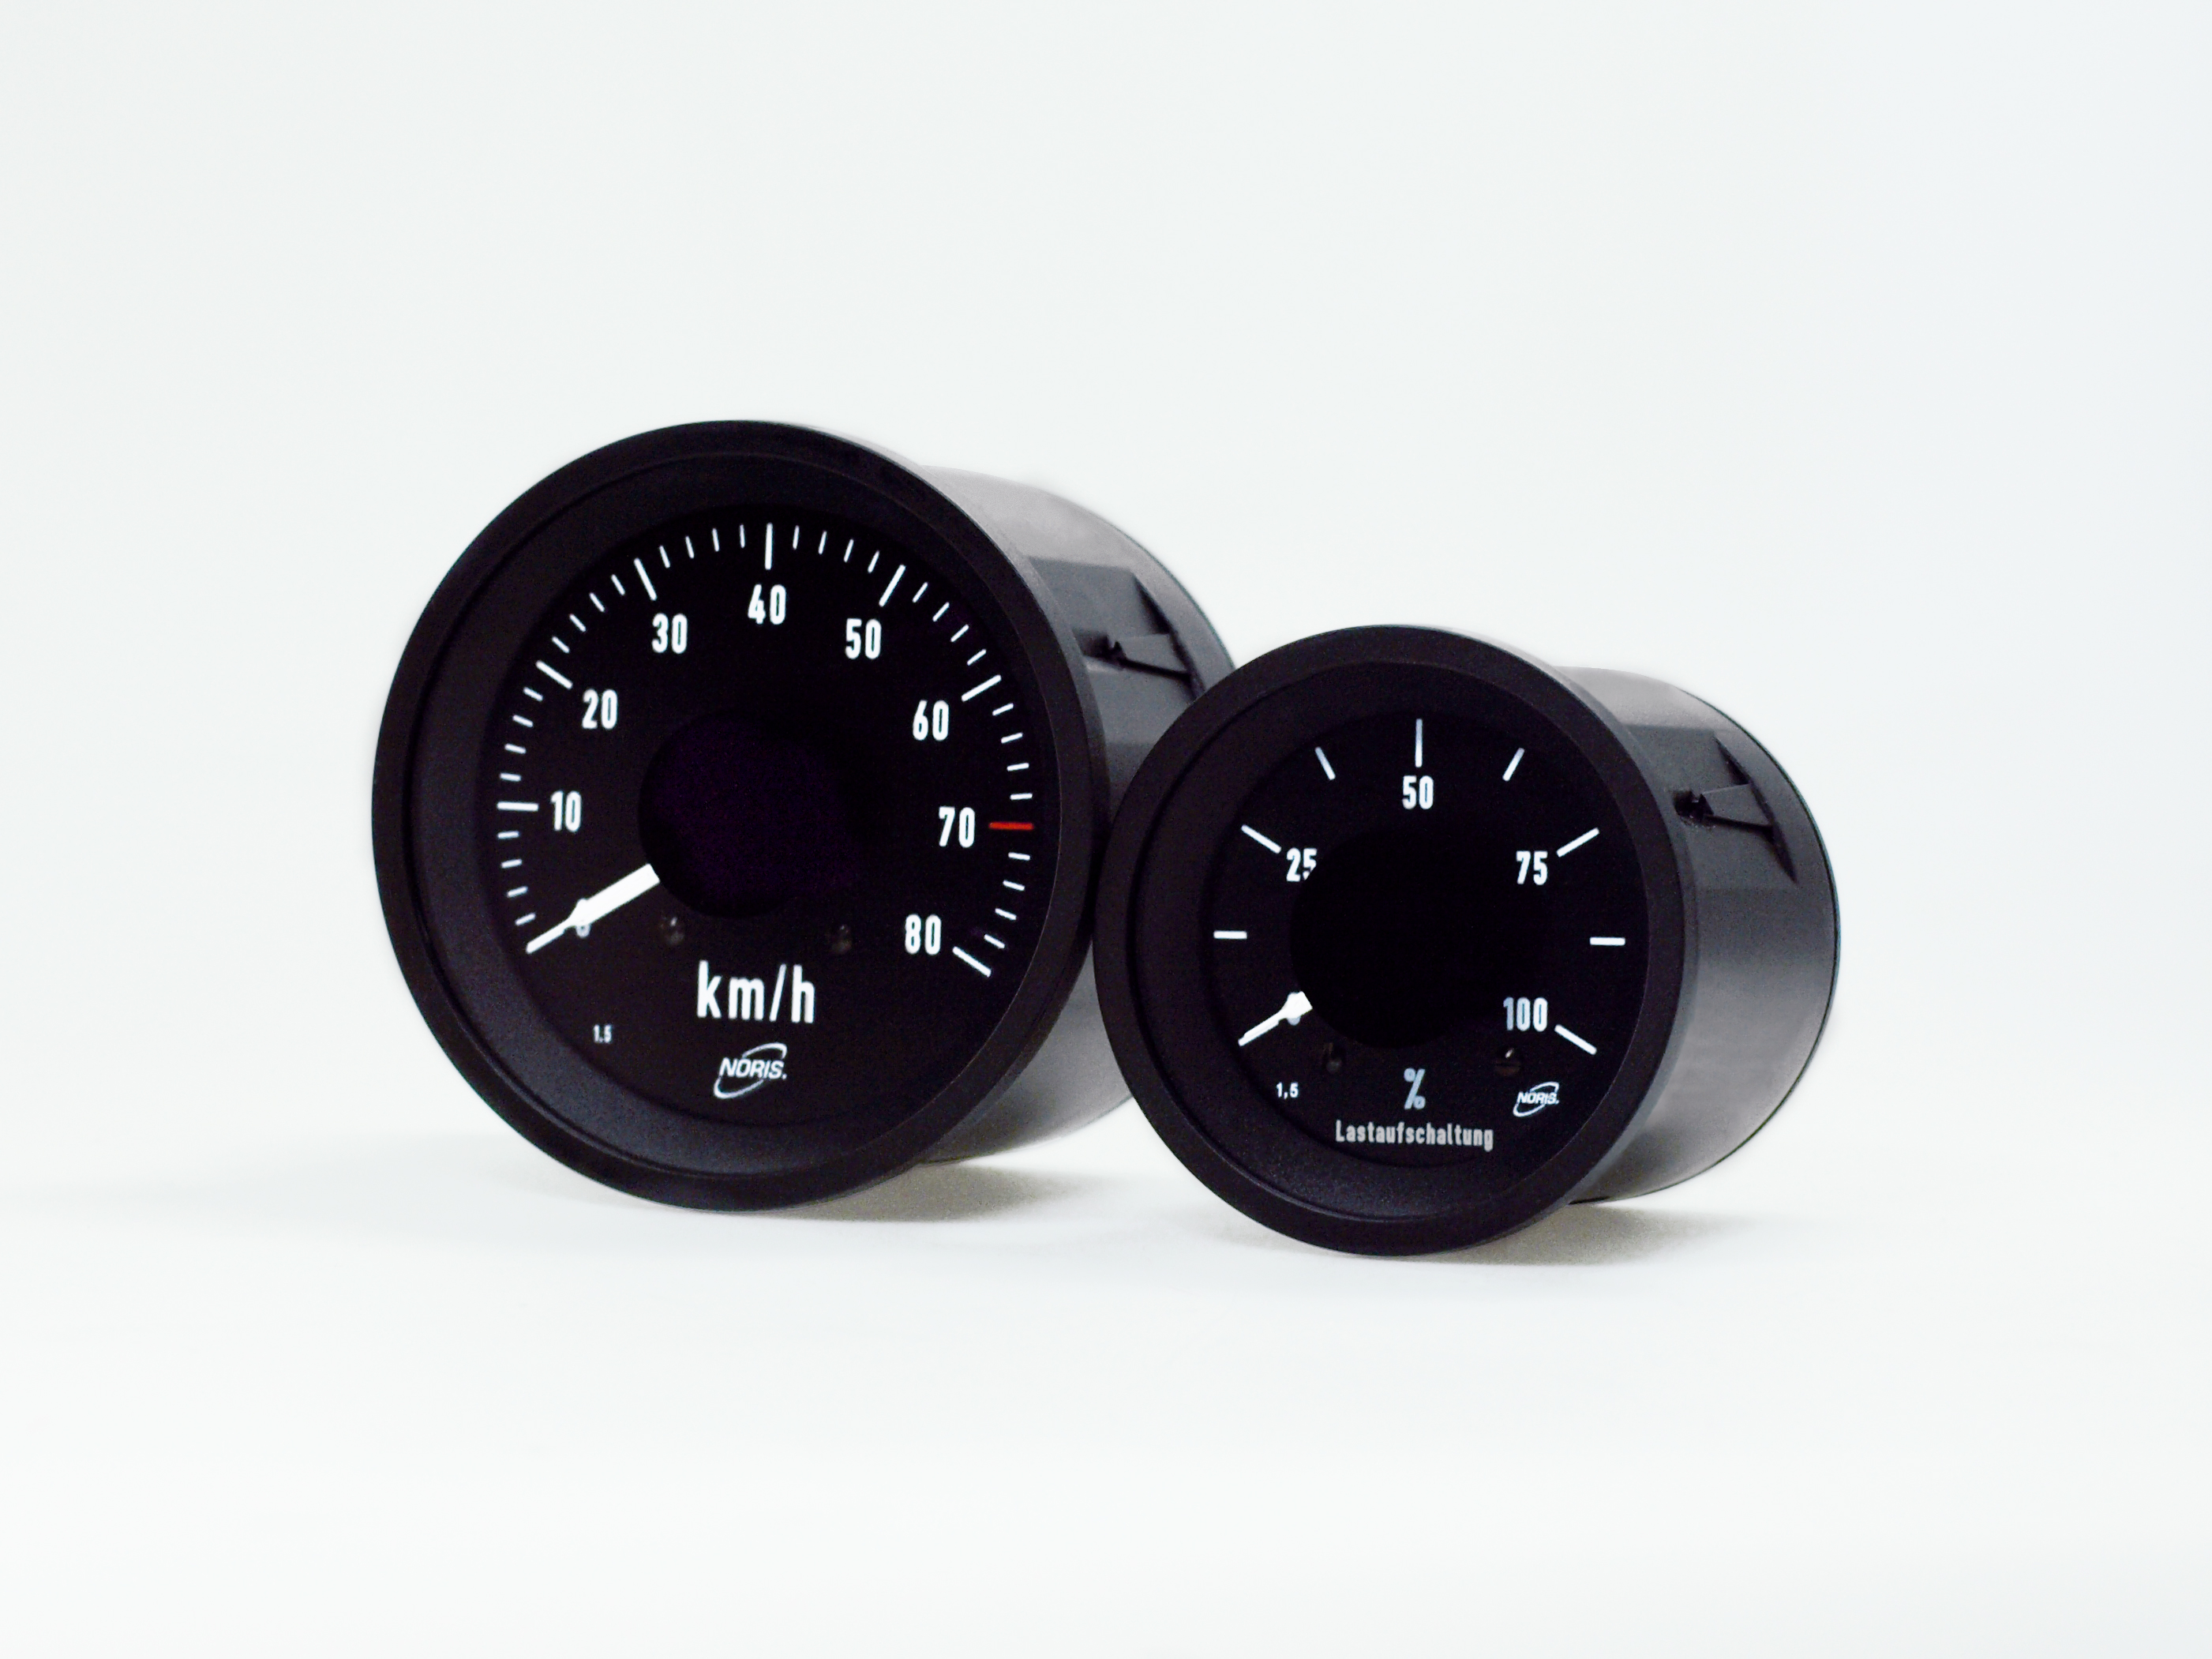 The image shows two round black analogue indicators with two different sizes arranged side by side